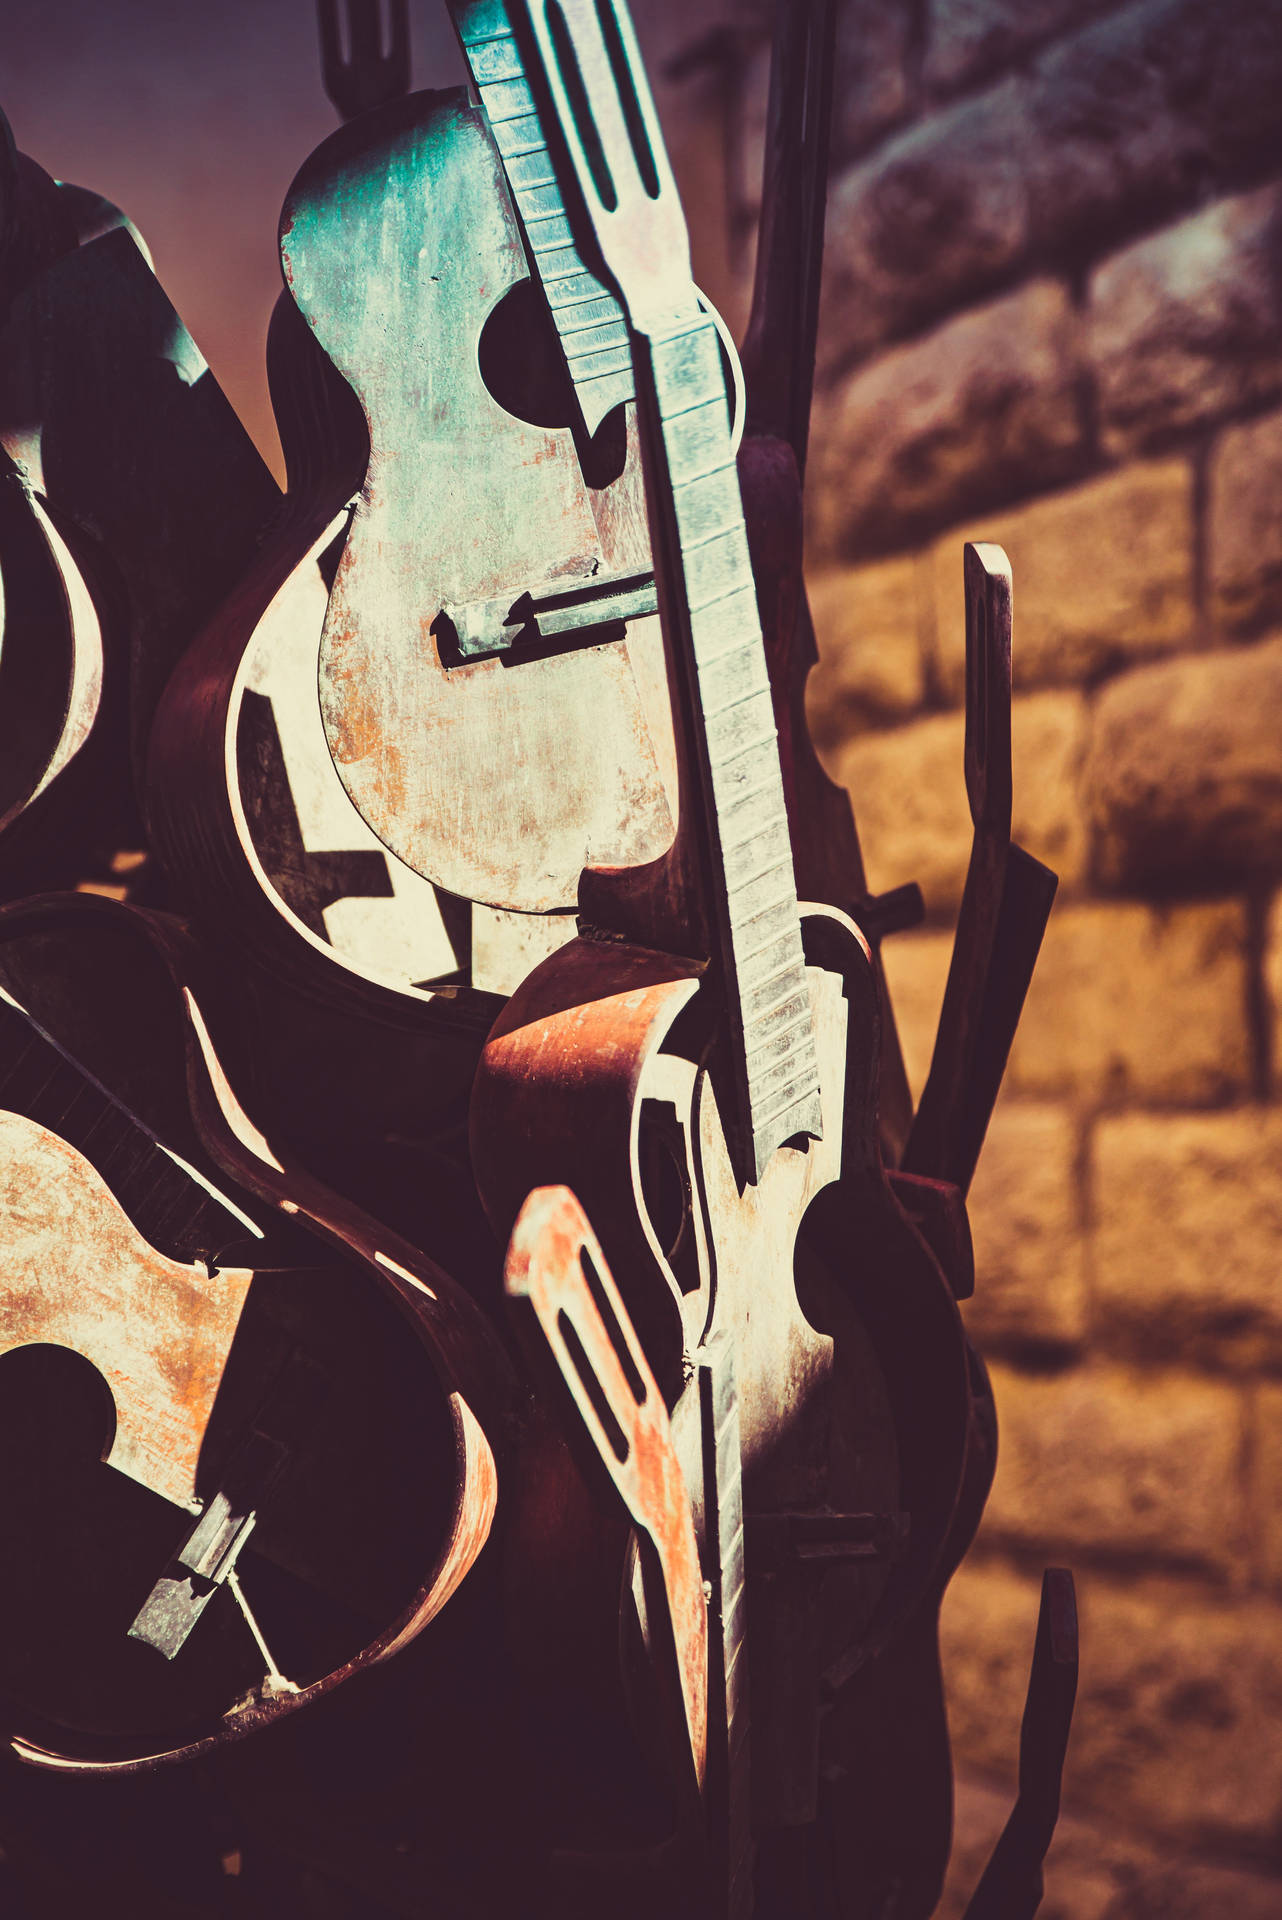 Guitar 3782X5665 Wallpaper and Background Image